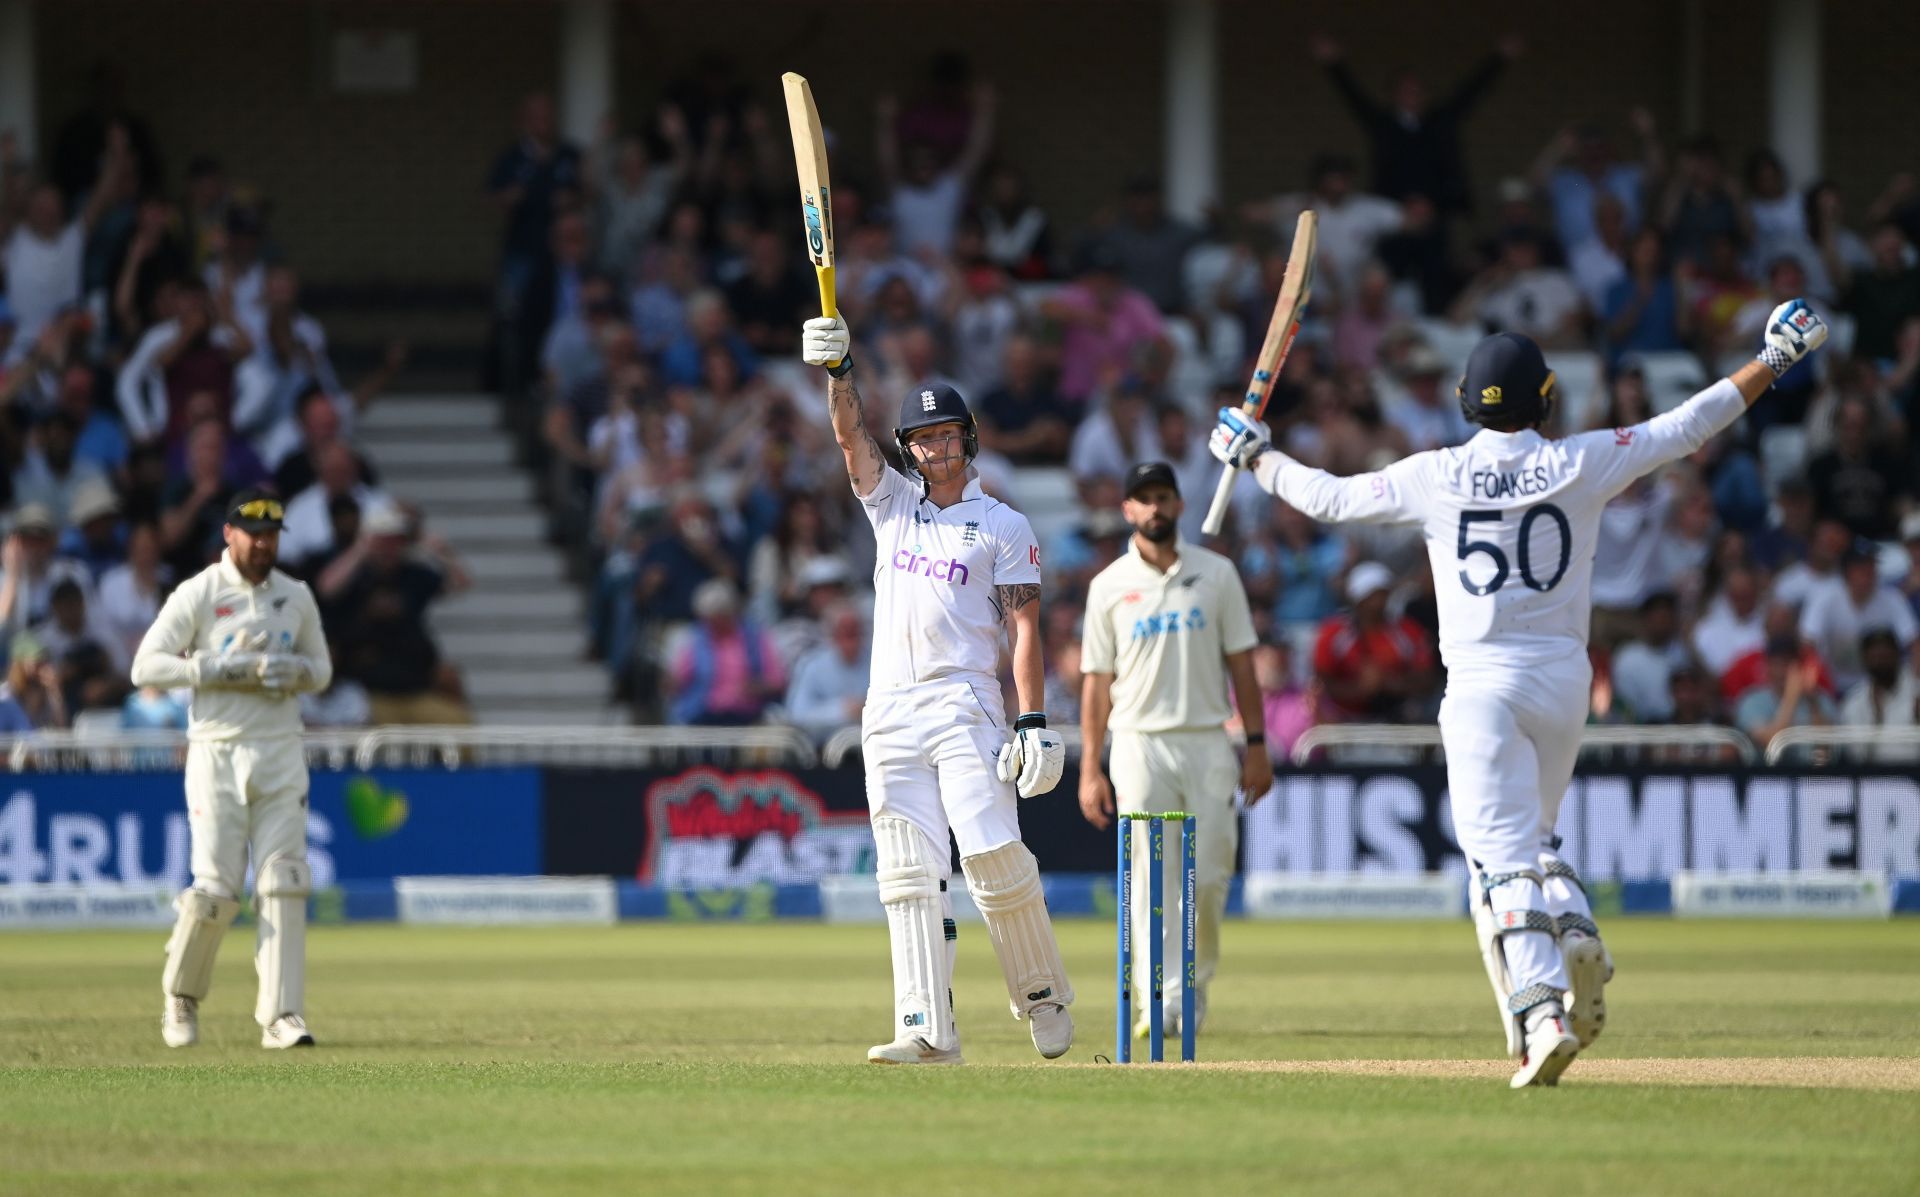 England v New Zealand - Second LV= Insurance Test Match: Day Five (Image Courtesy: Getty Images)